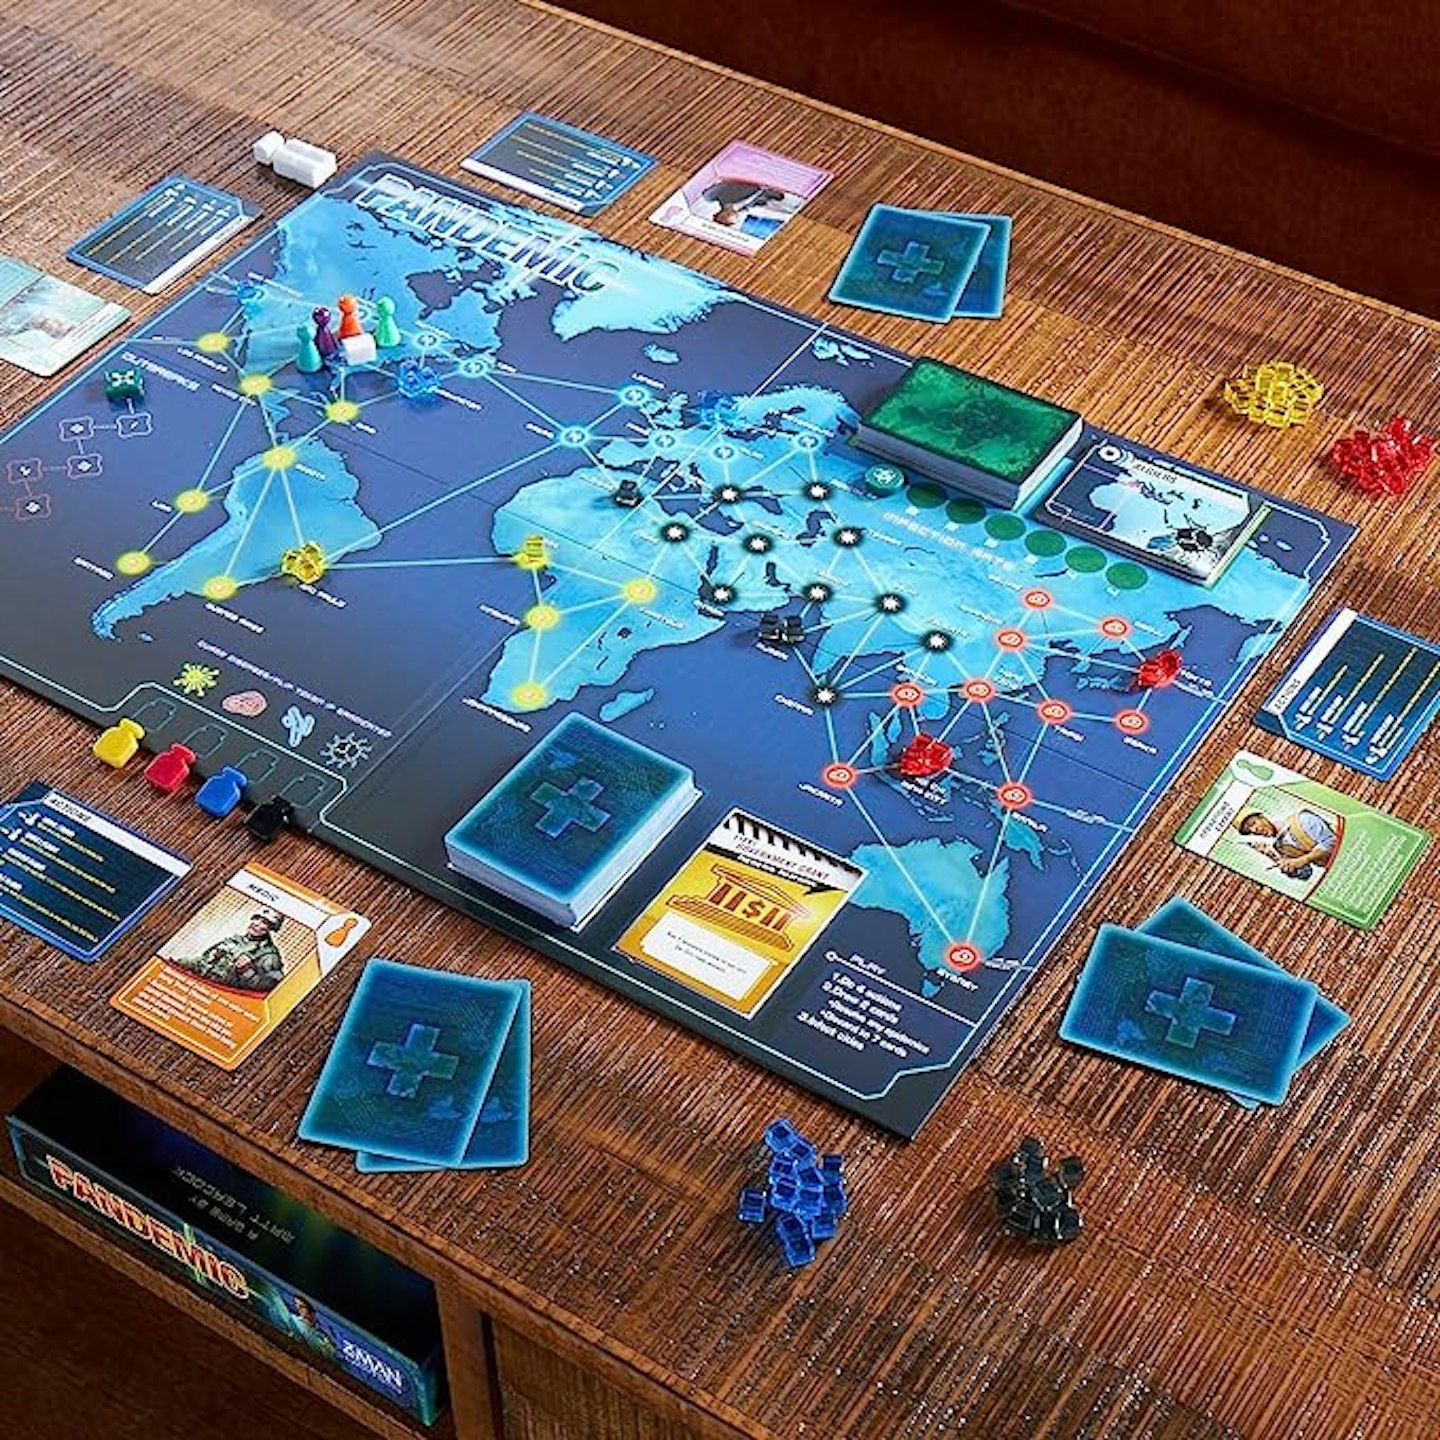 Pandemic board game contents 